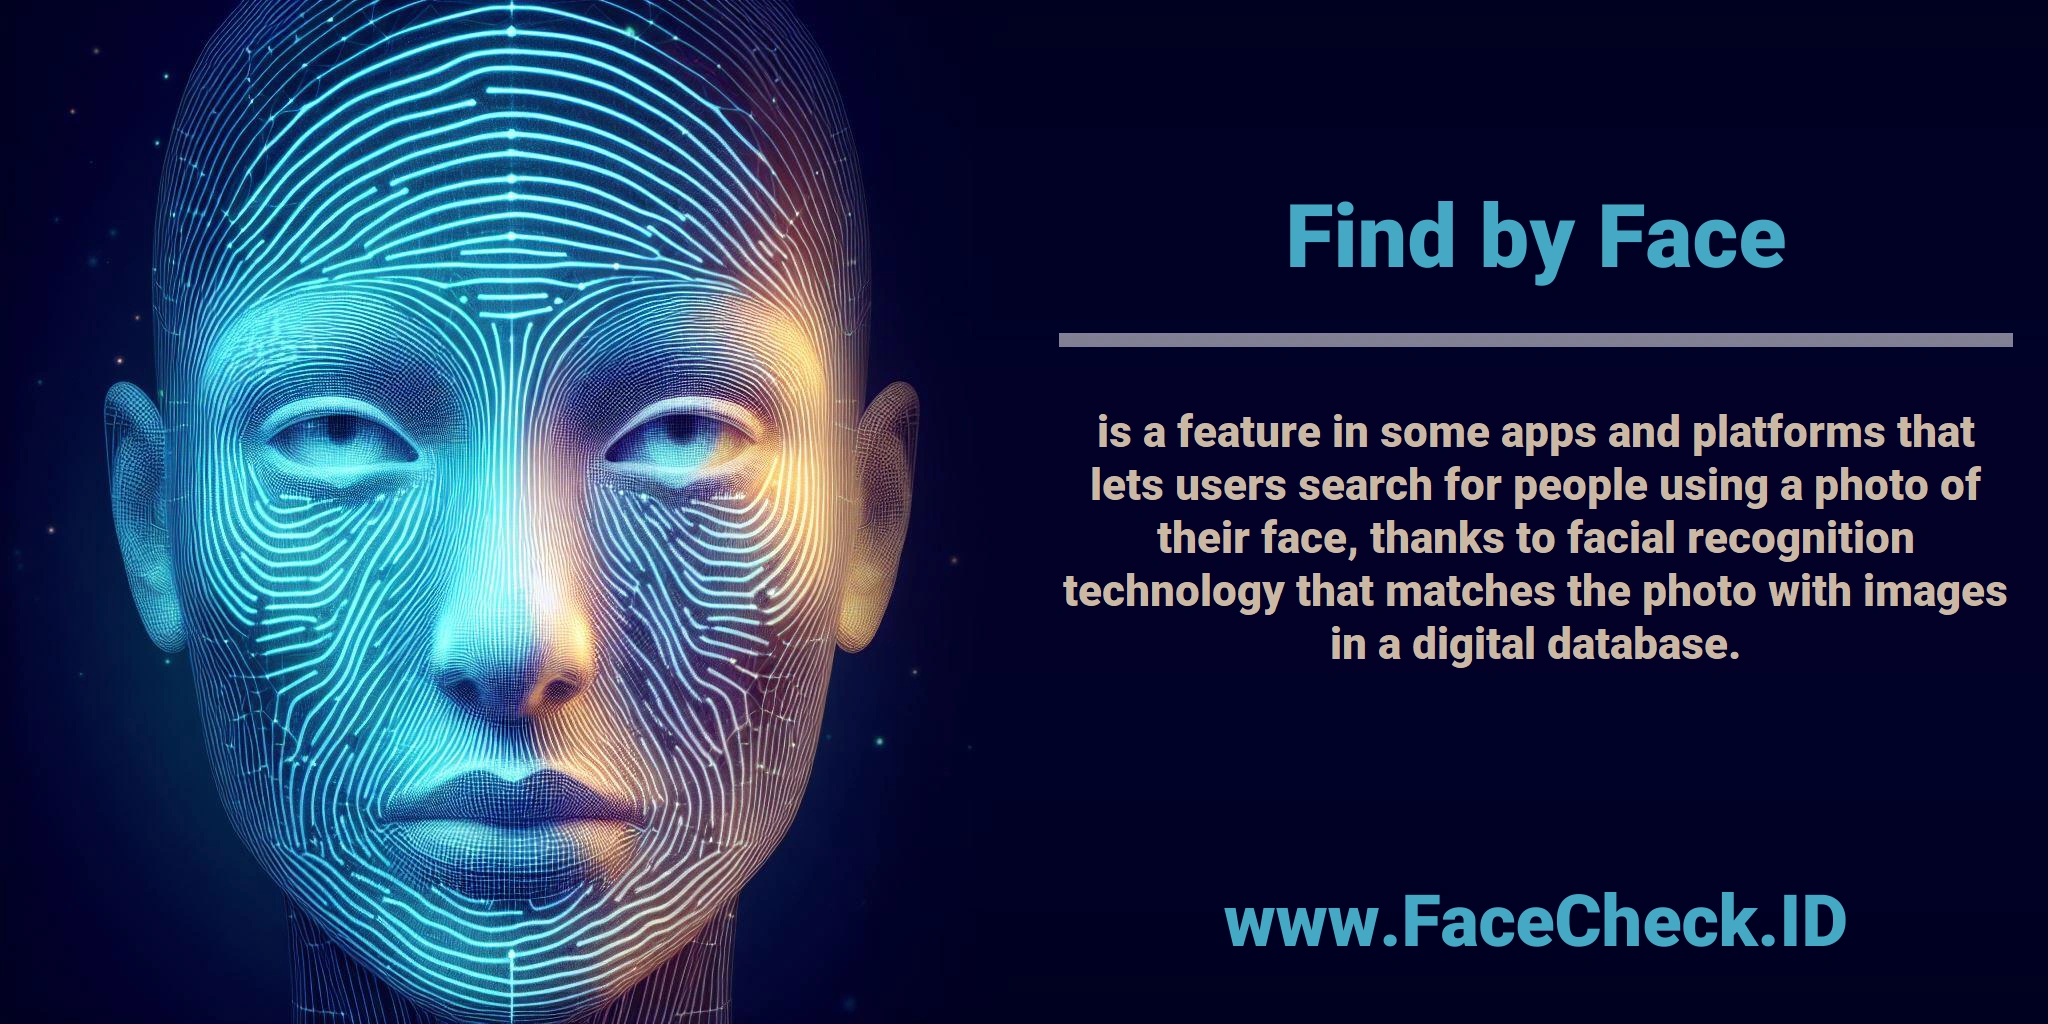 <b>Find by Face</b> is a feature in some apps and platforms that lets users search for people using a photo of their face, thanks to facial recognition technology that matches the photo with images in a digital database.